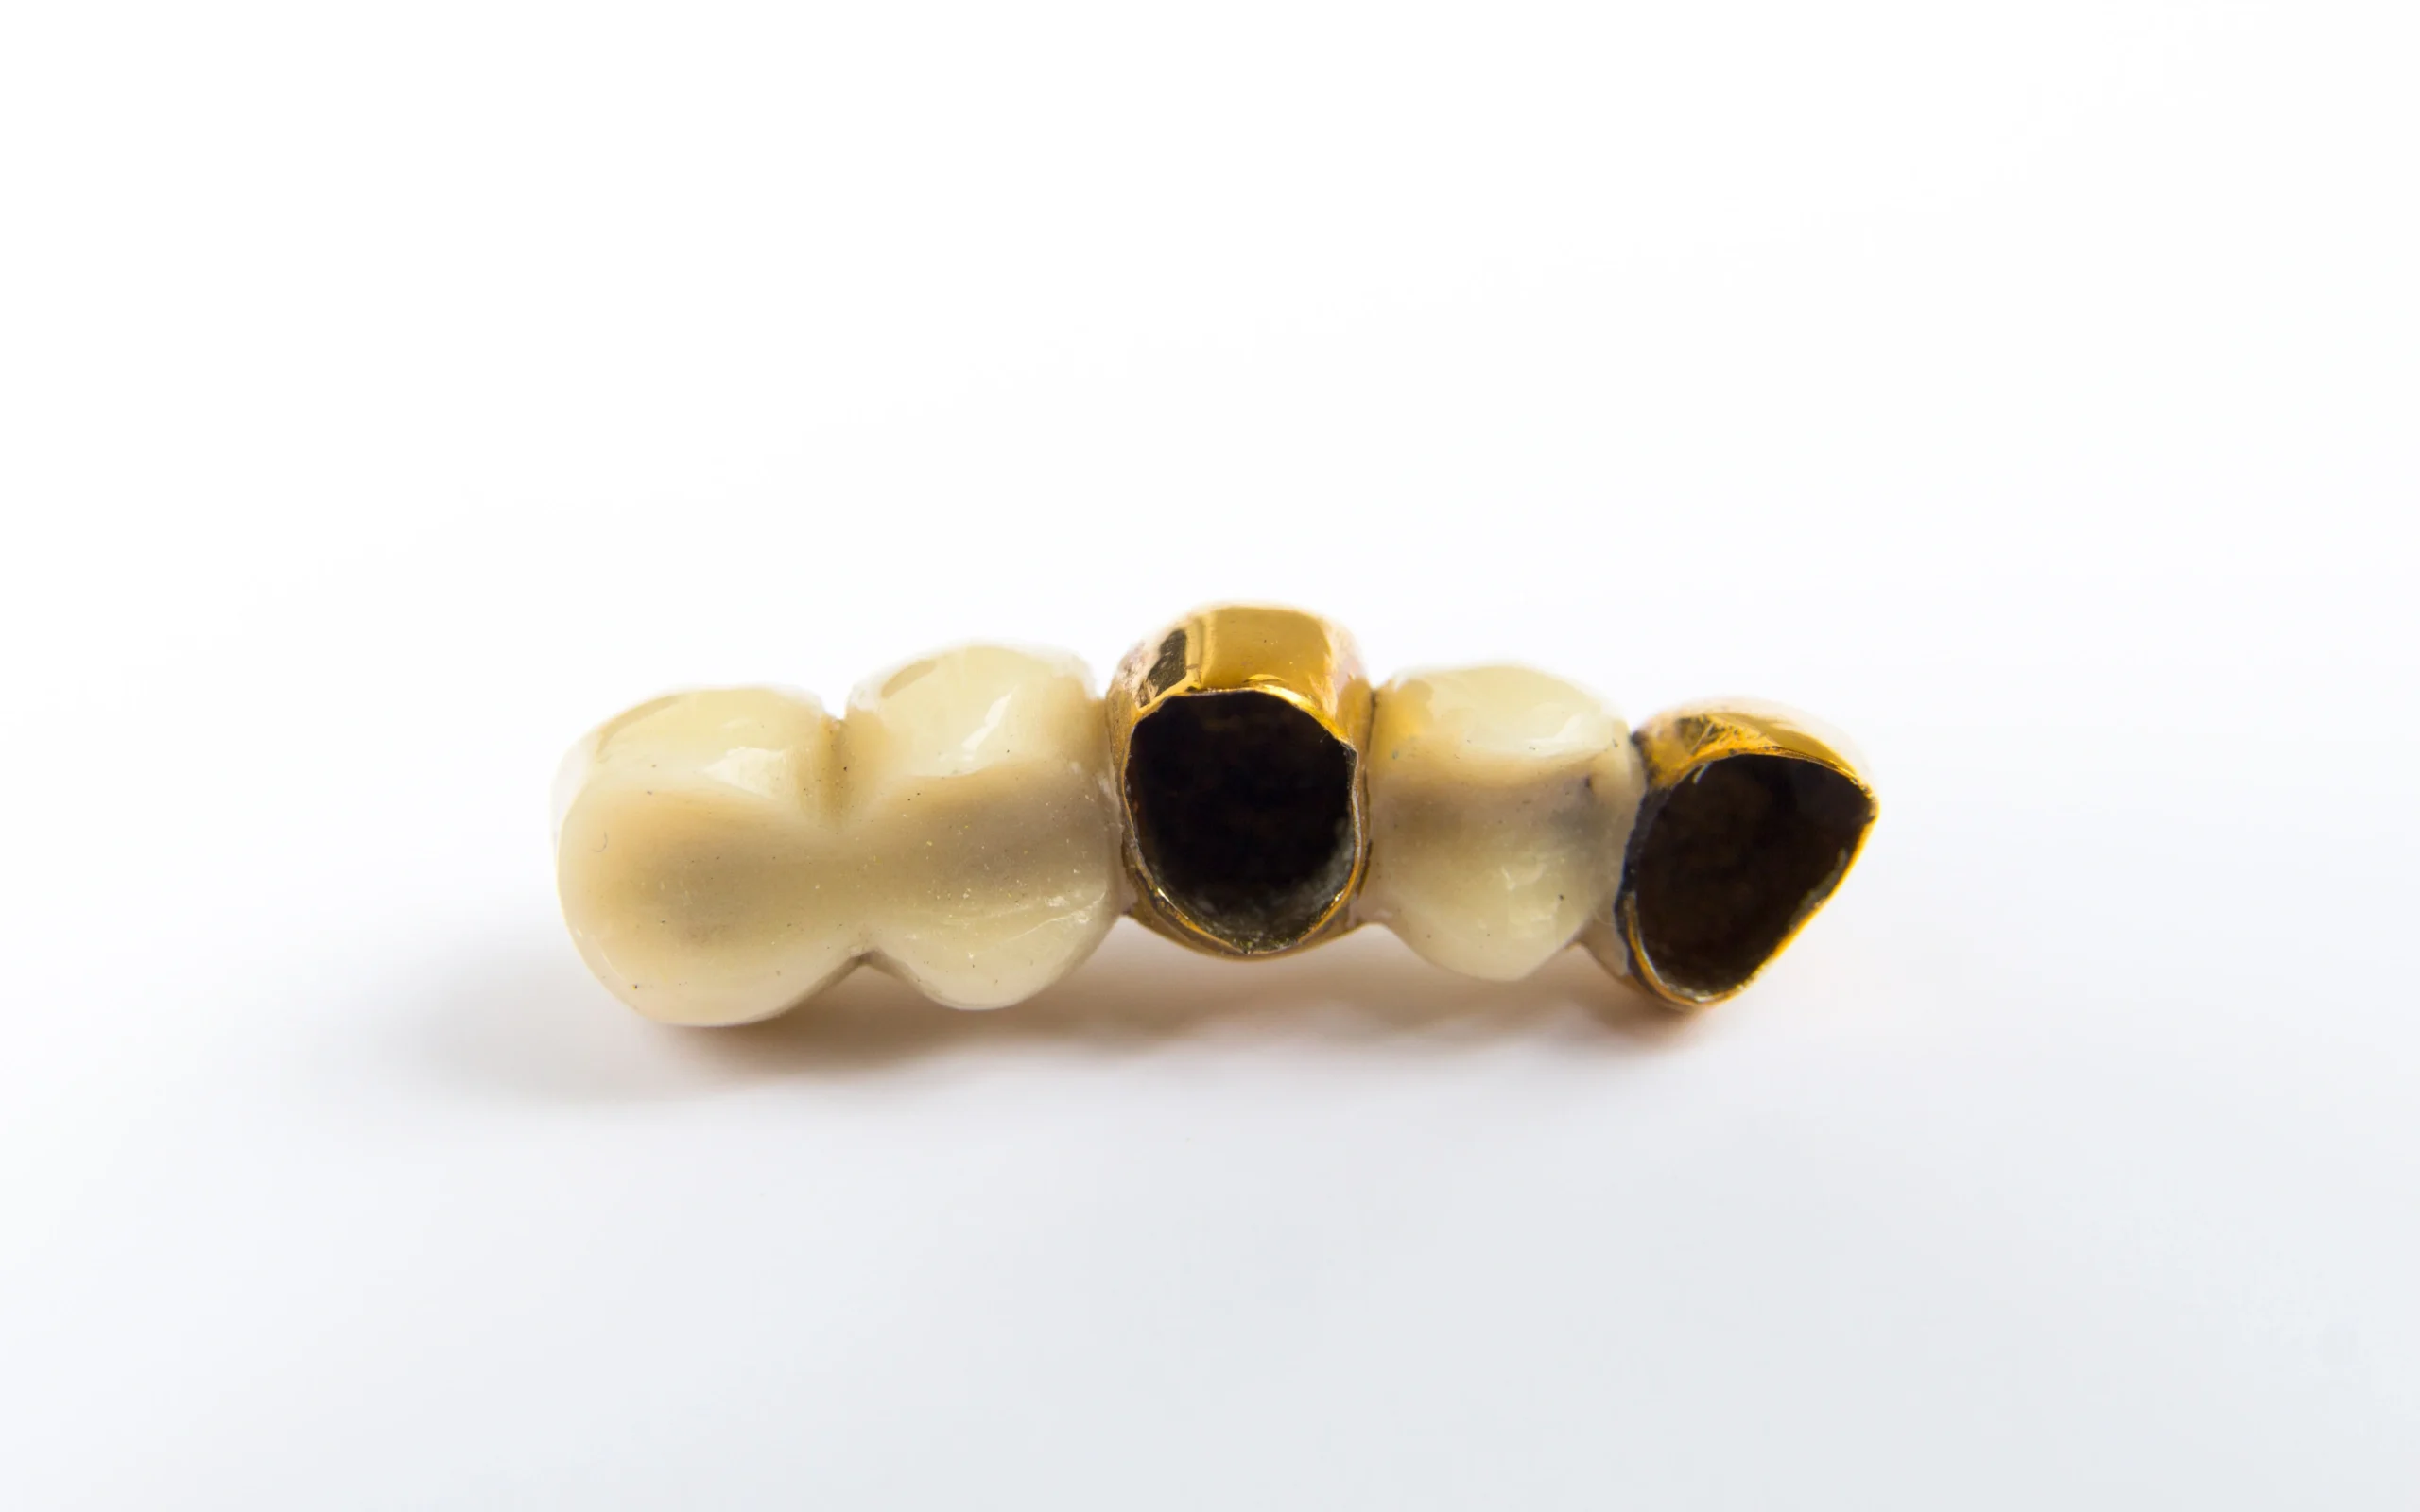 A dental bridge featuring 2 gold tooth caps shown from the bottom